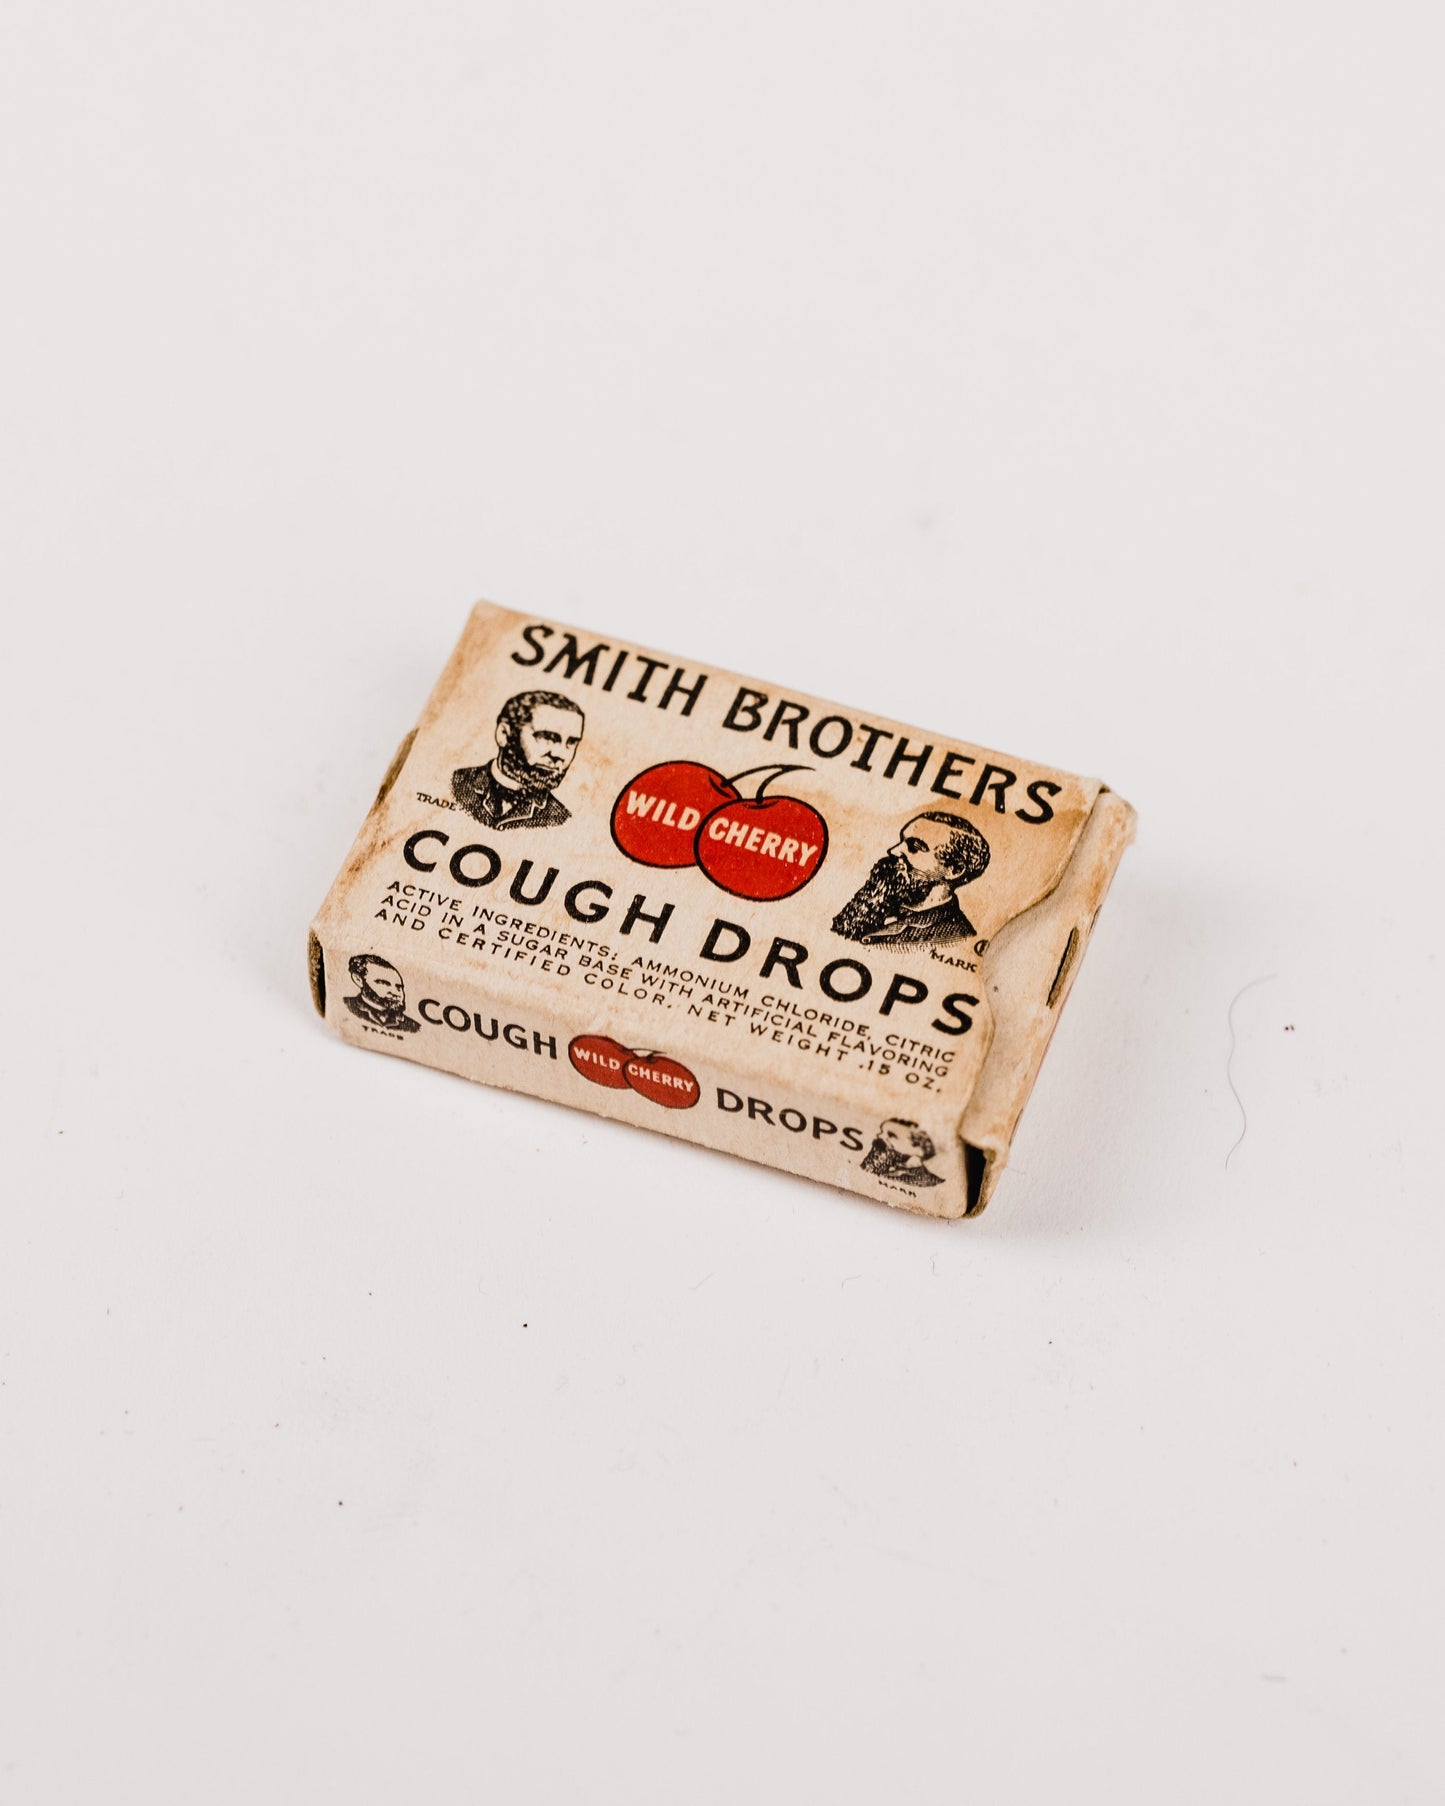 Smith Brothers Cough Drops (Box Only)